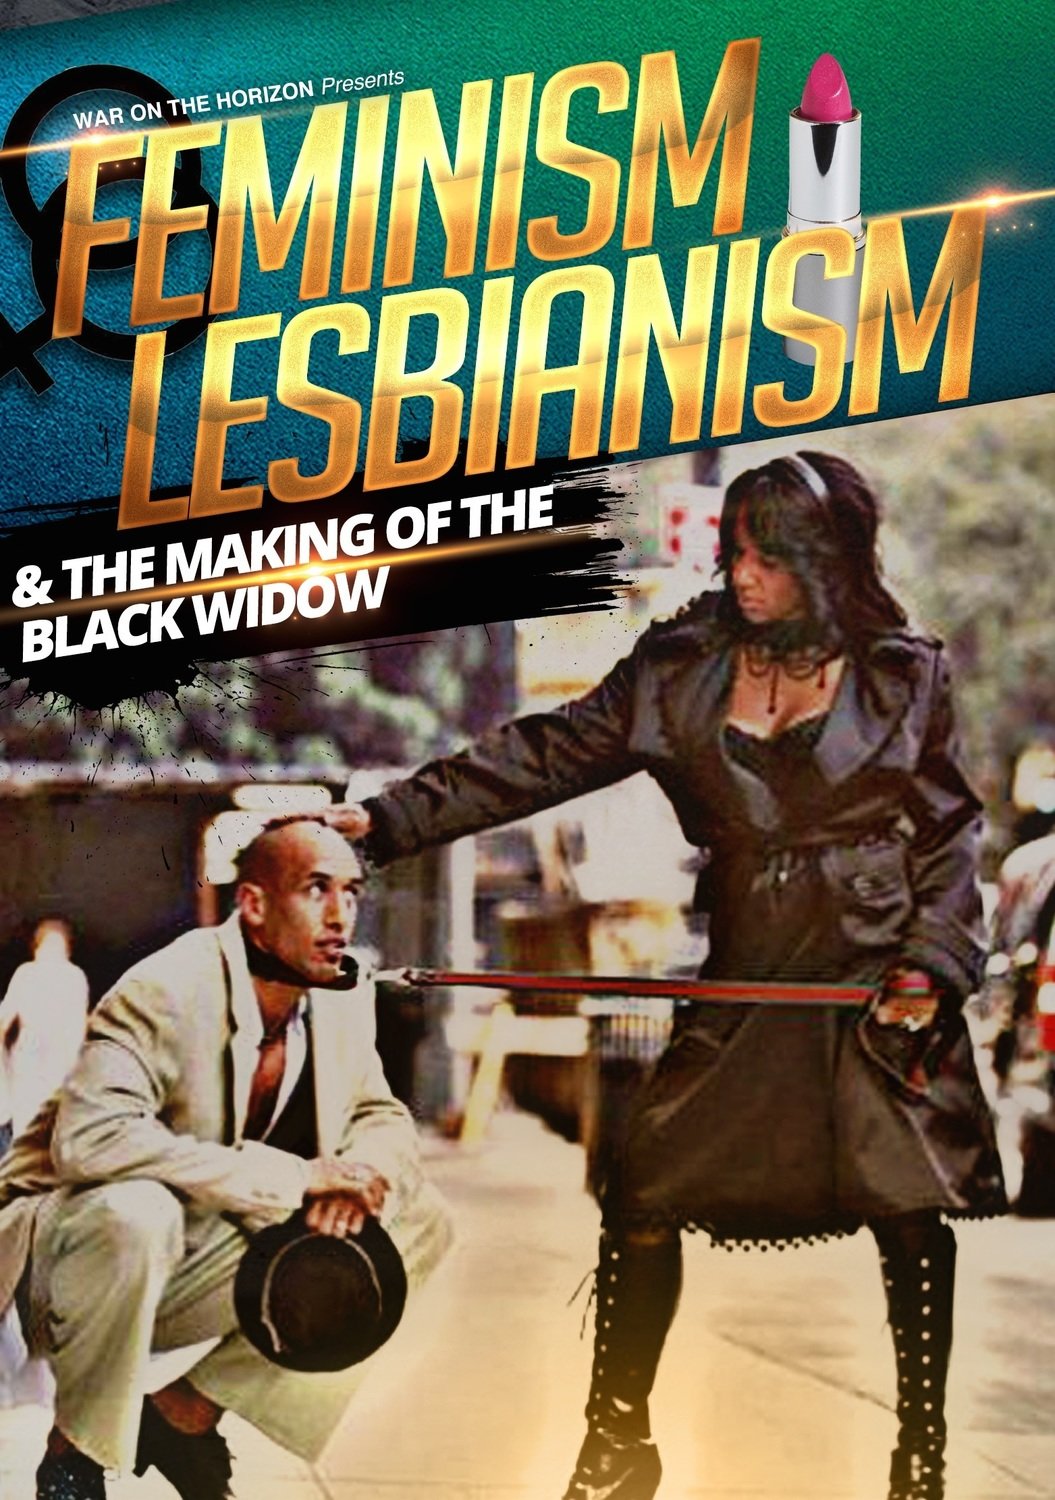 Feminism, Lesbianism & the Making of a Black Widow - .mp4 Electronic Email Version